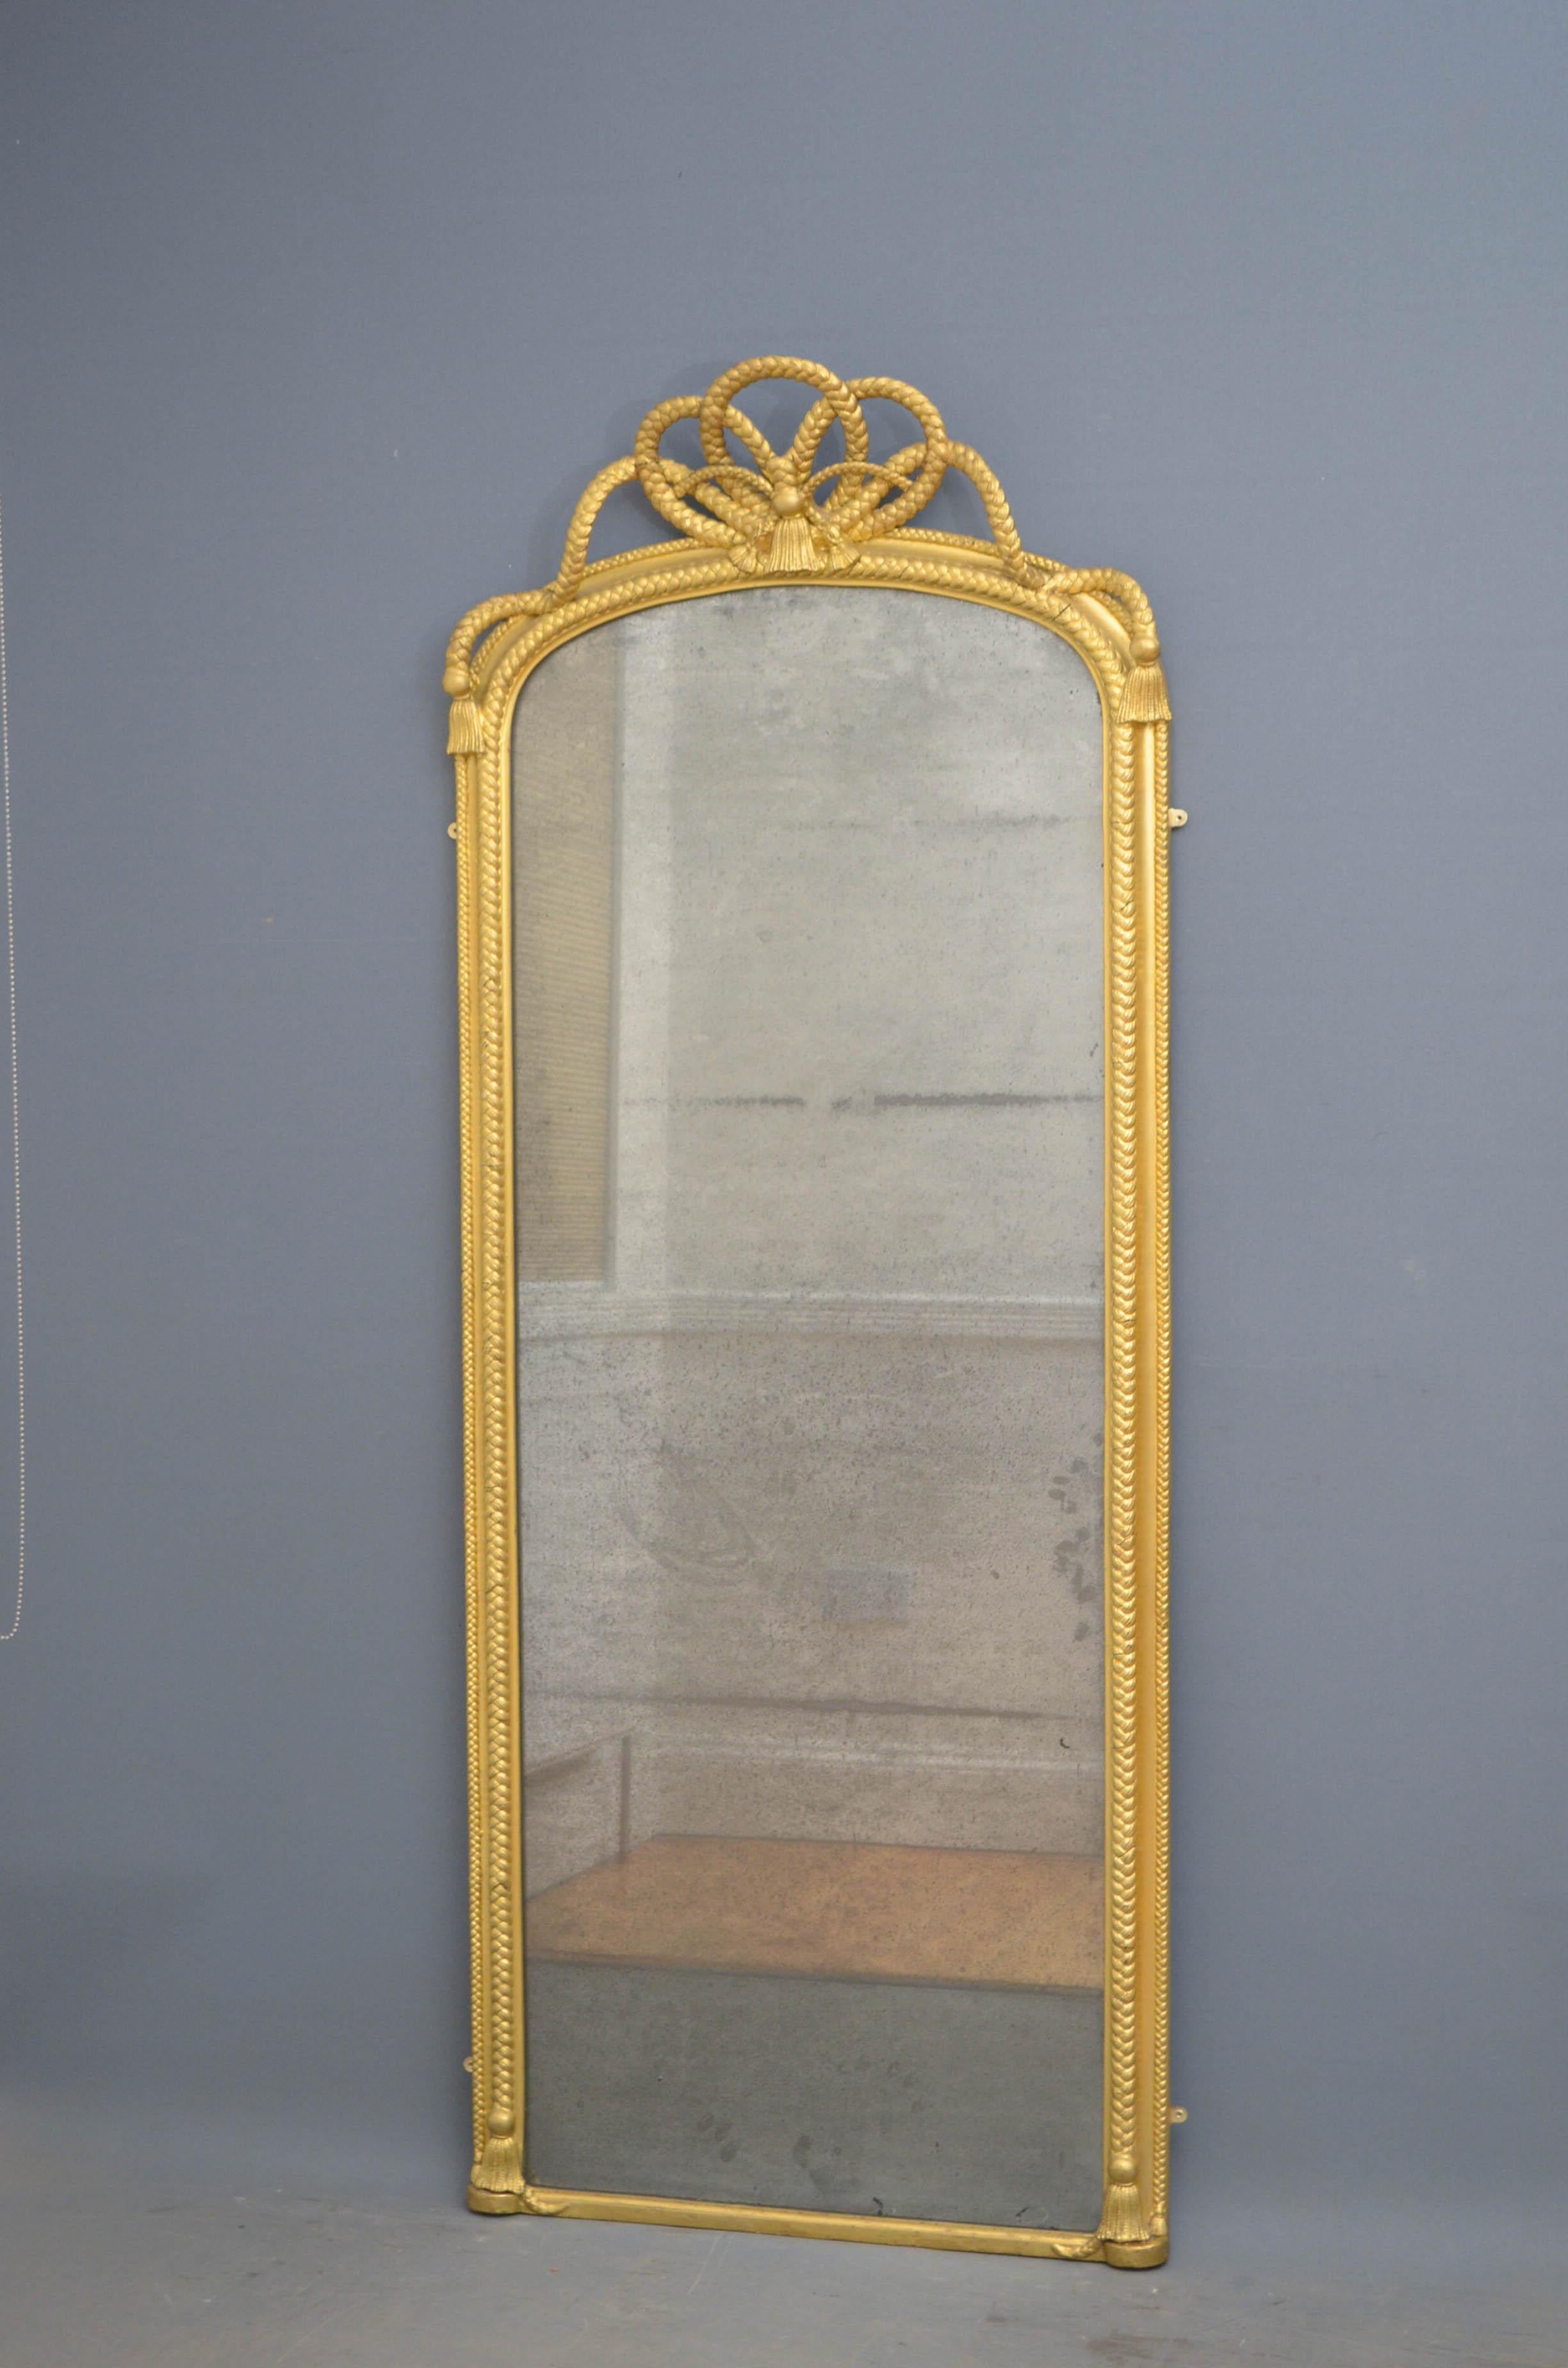 Sn4603, stylish Victorian floor standing or wall hanging mirror with original extensively foxed glass in rope decorated frame with large rope bow to the top and tassels to base. This mirror has been refinished in the past, all in wonderful condition